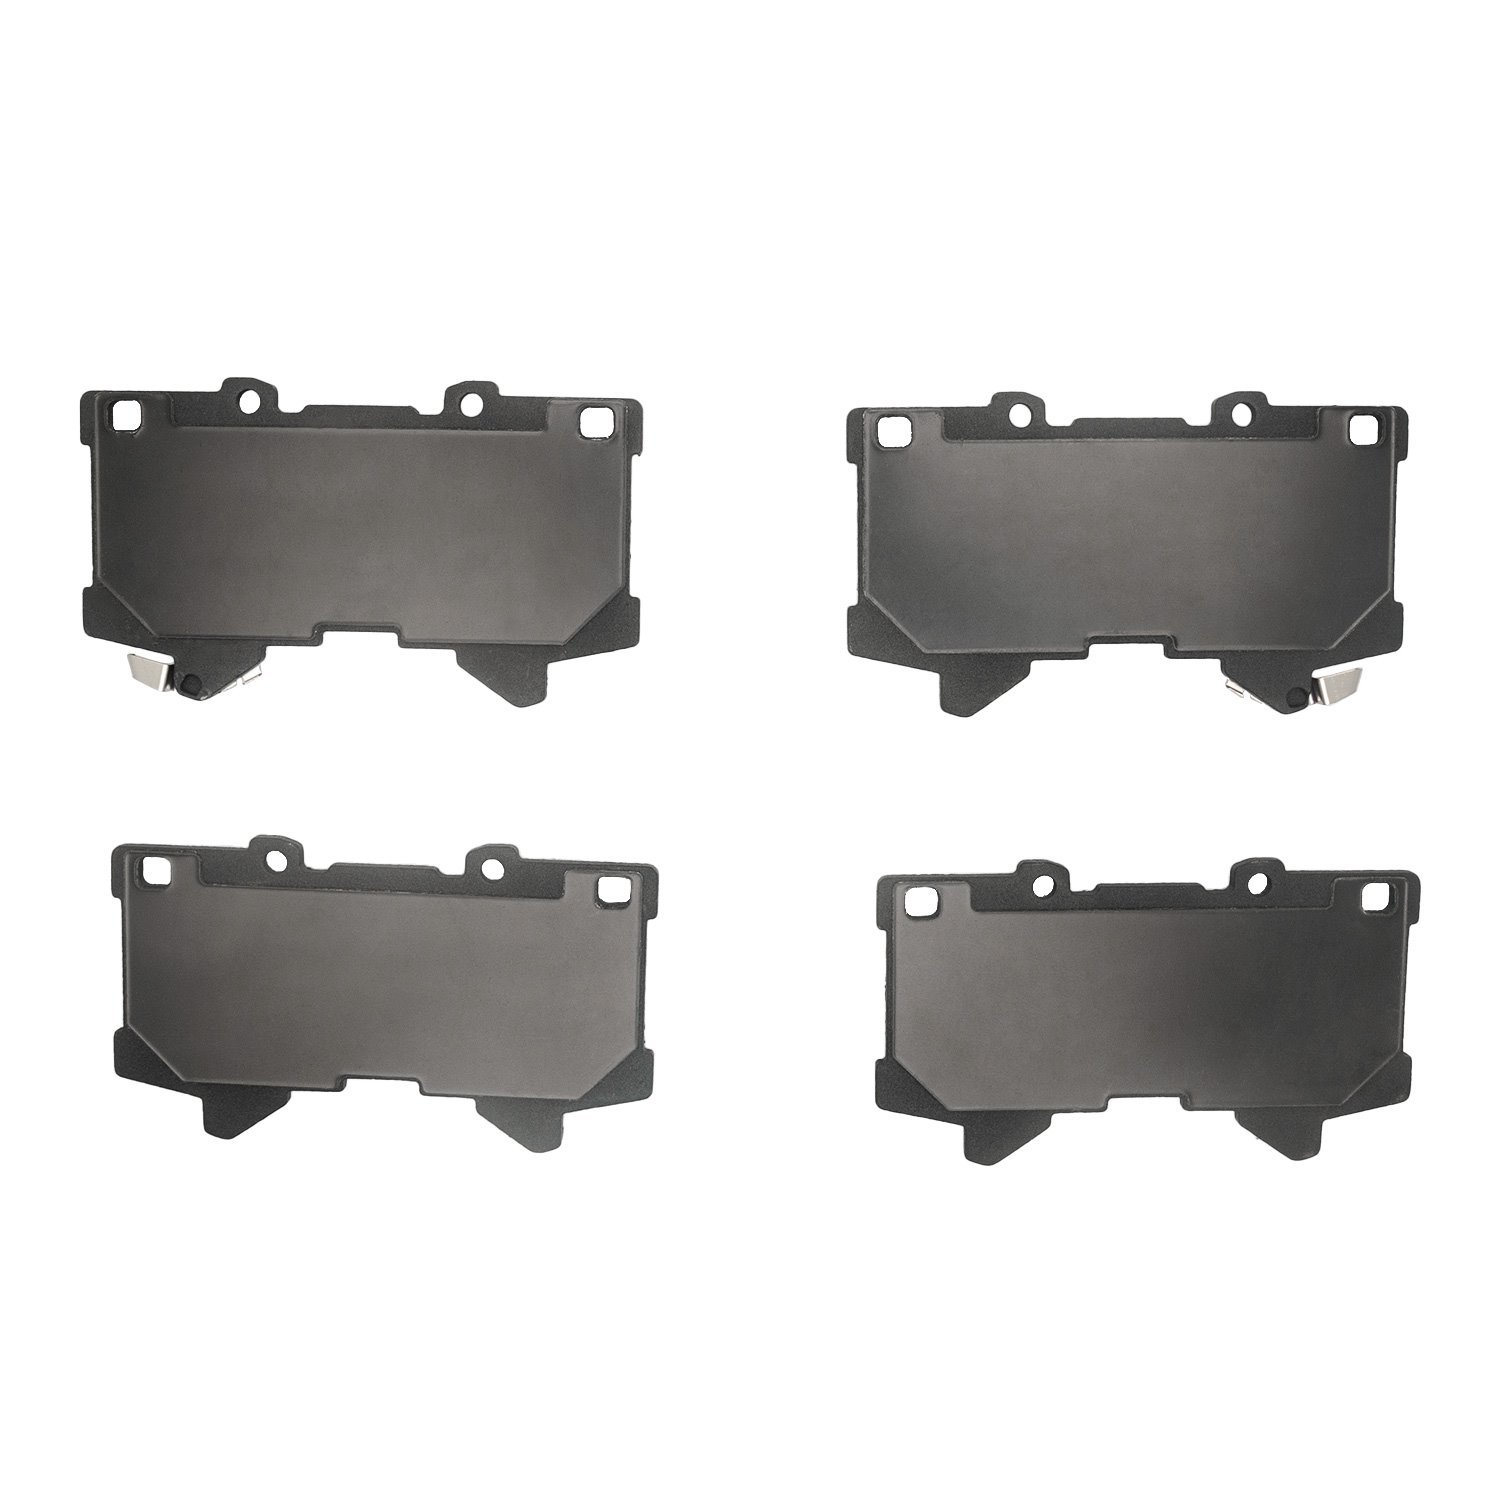 1400-2442-00 Ultimate-Duty Brake Pads Kit, Fits Select Lexus/Toyota/Scion, Position: Front